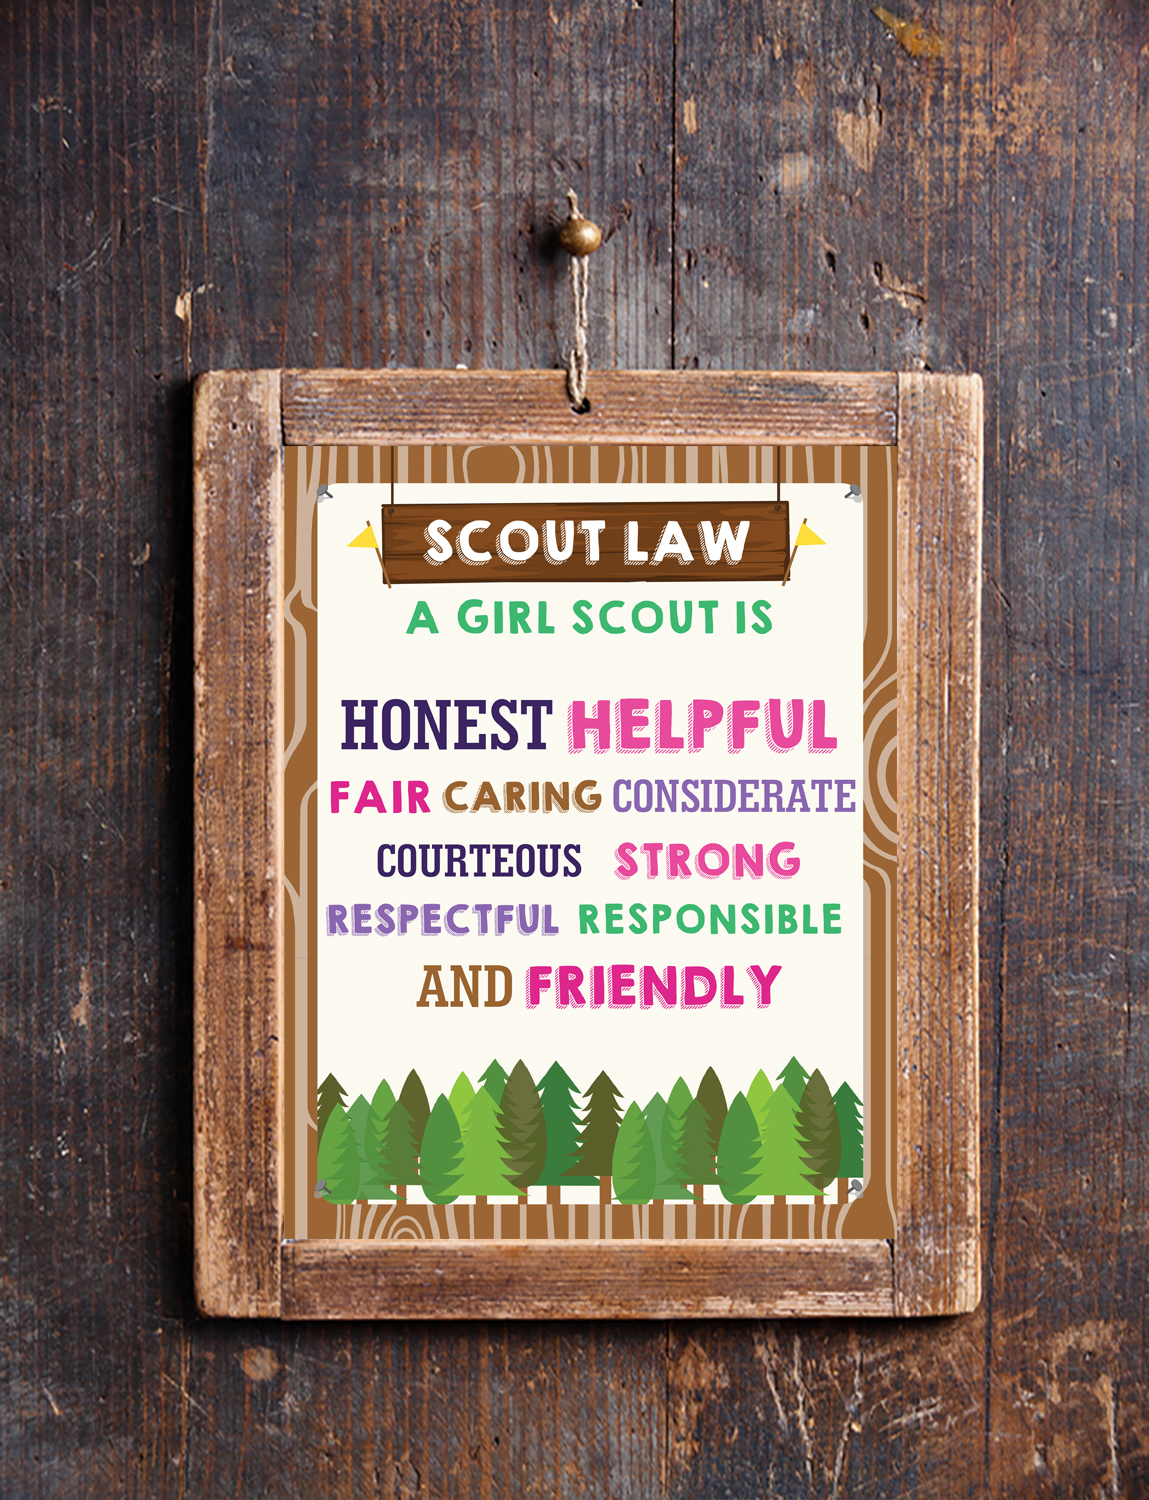 Instant Download - Girl Scout Motto, Oath and Law Posters. #girlscouts